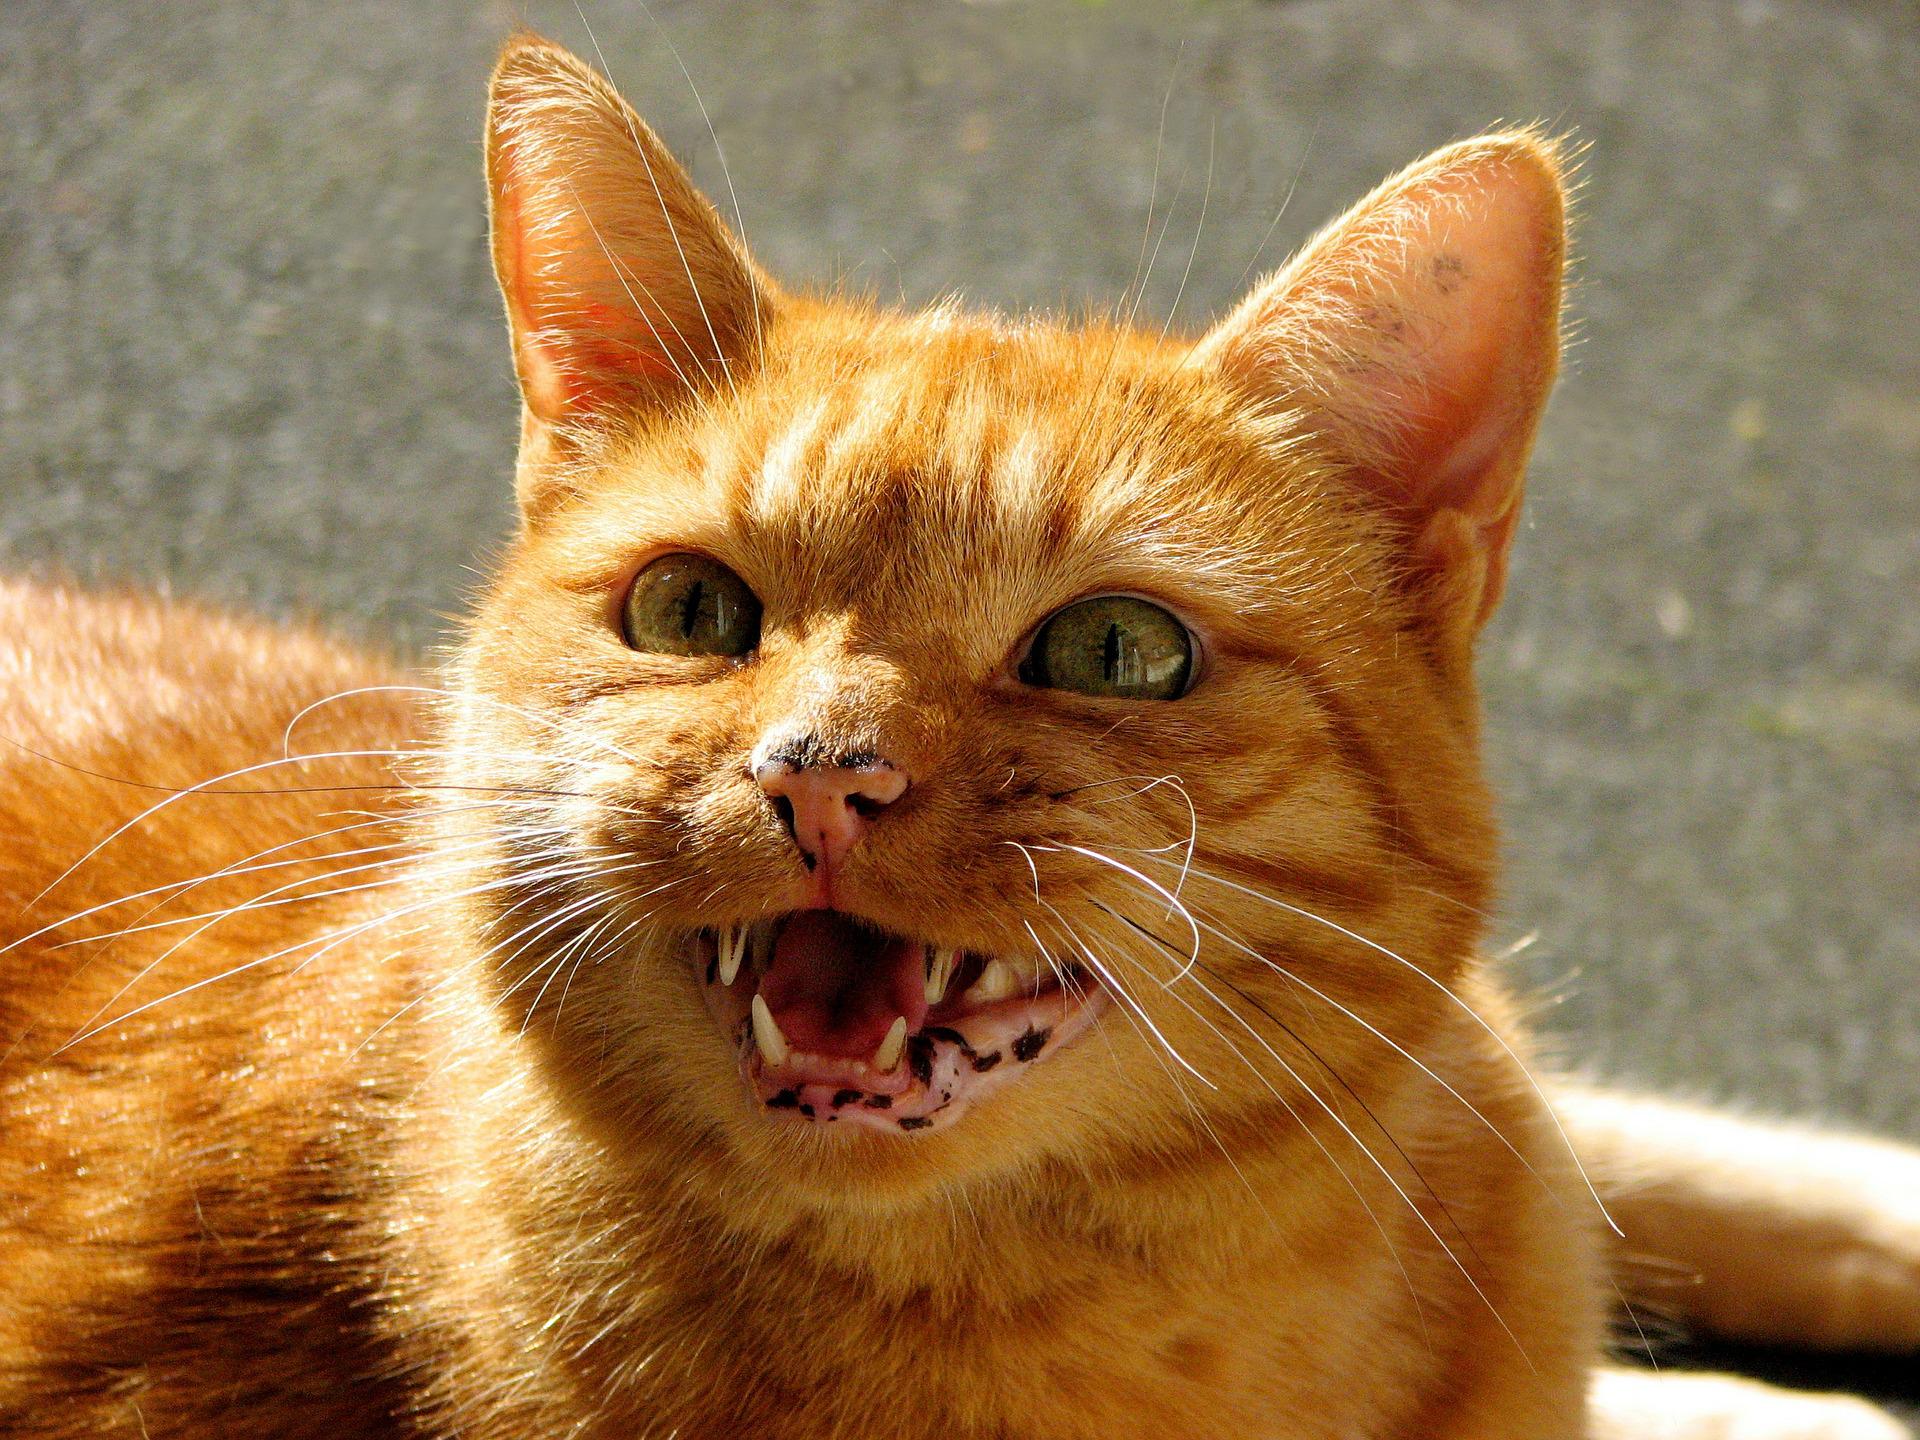 How rare is rabies in cats?